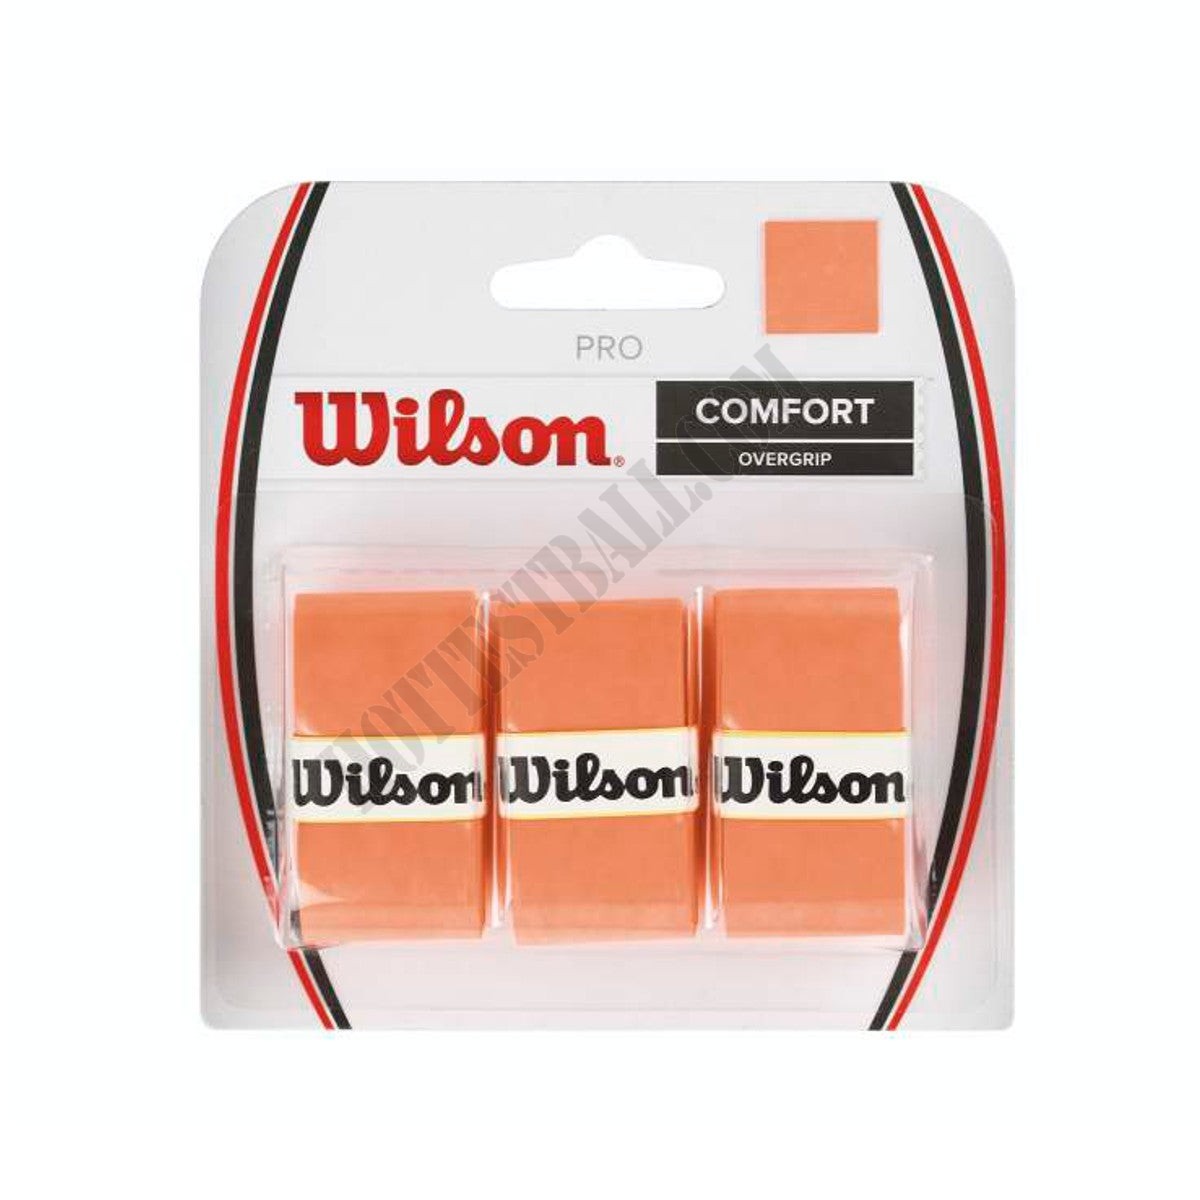 Pro Overgrip, 3 Pack - Wilson Discount Store - -0